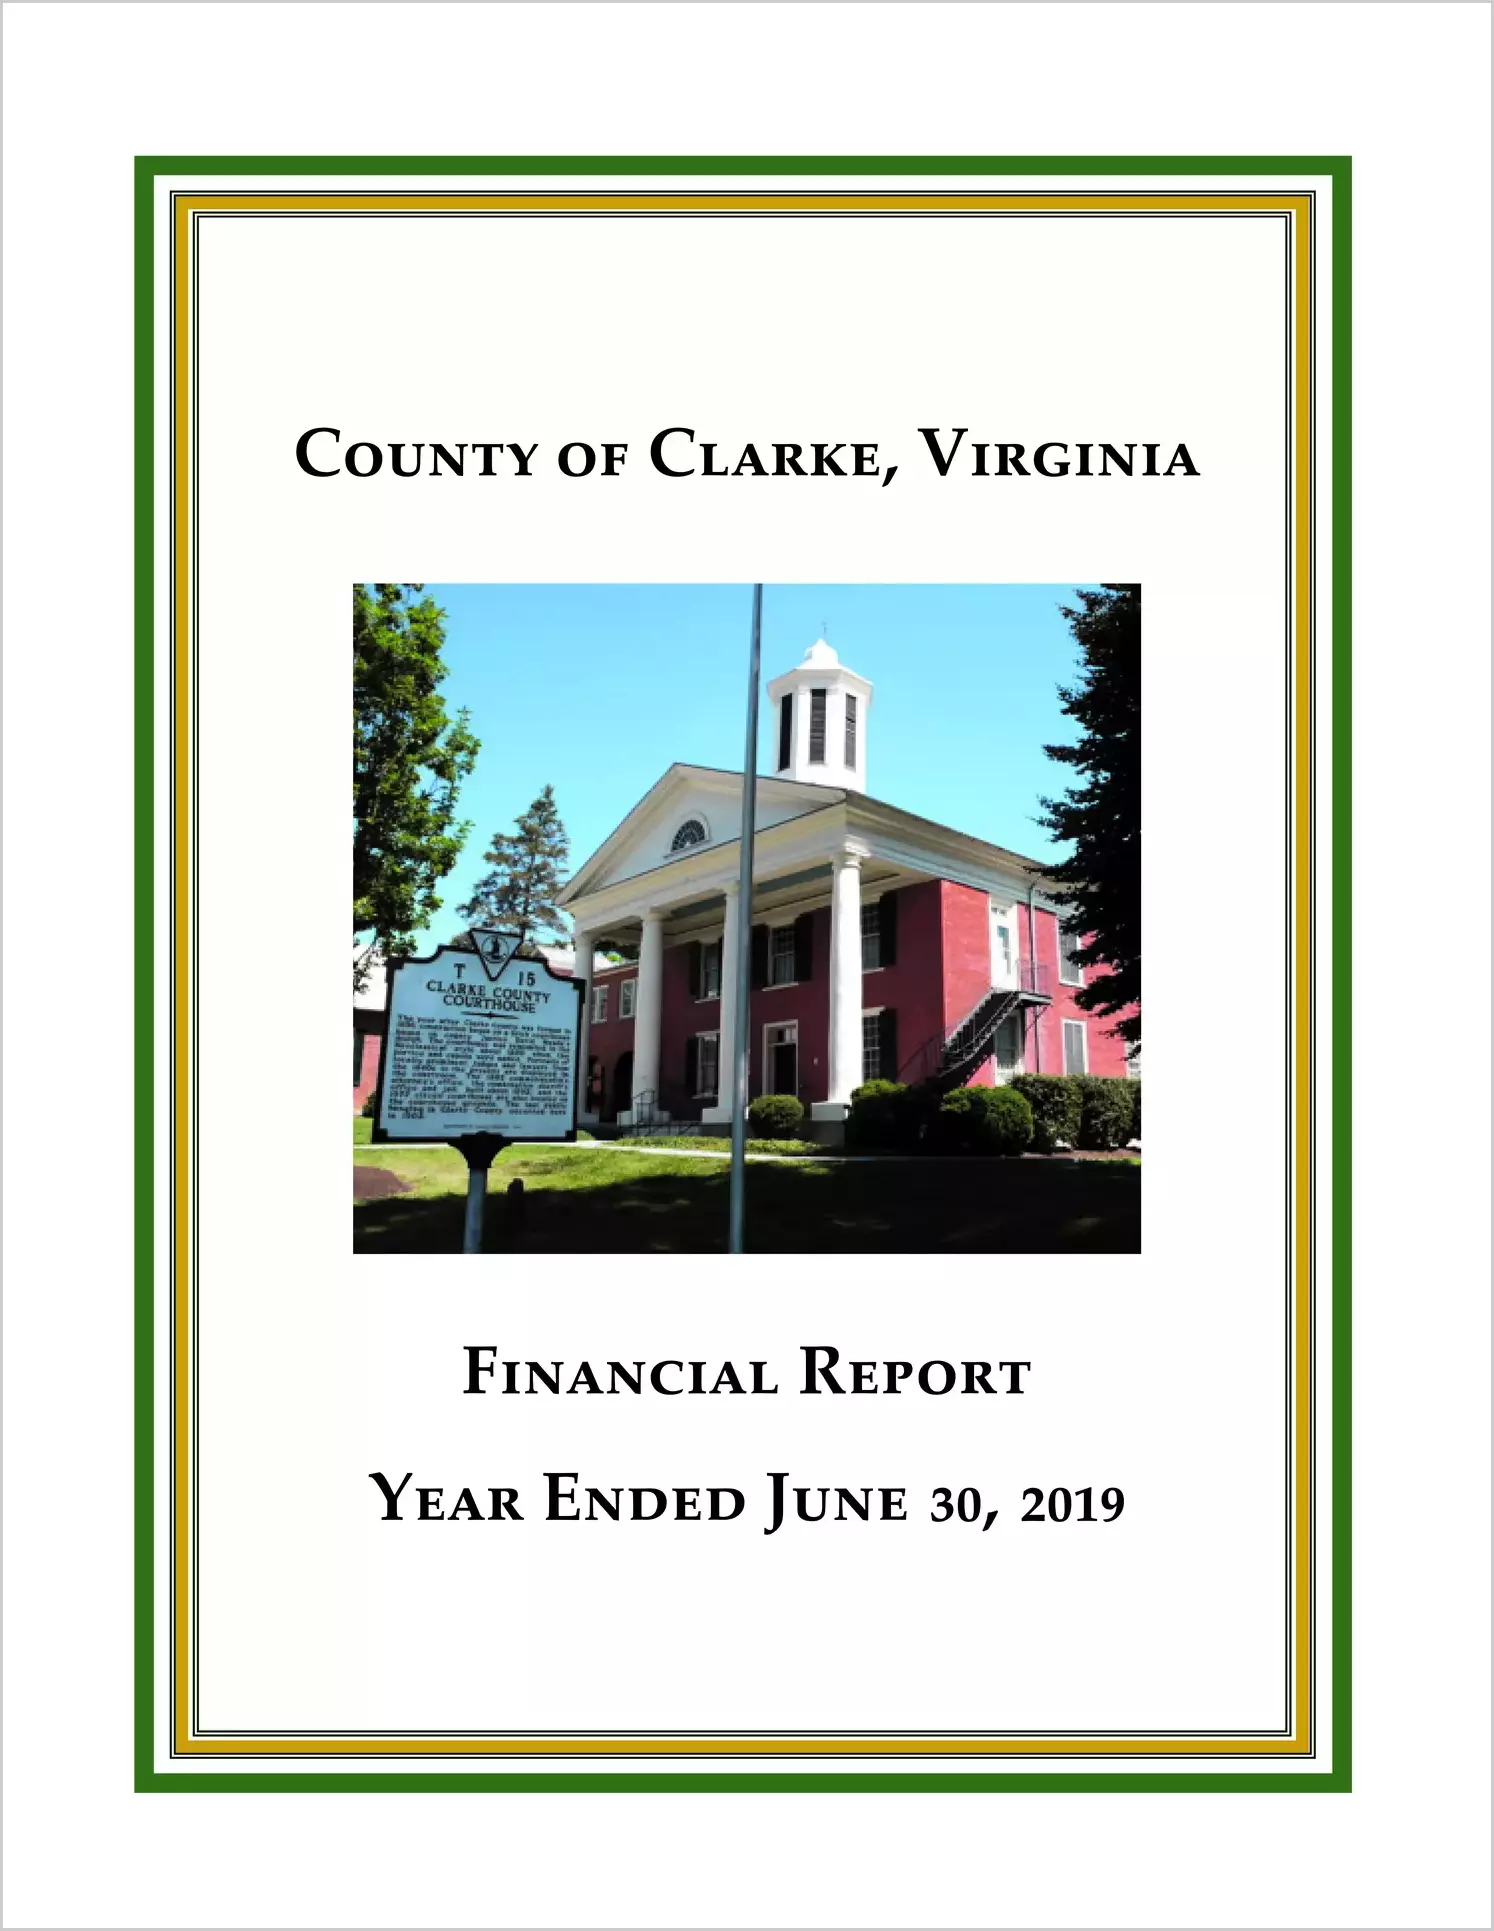 2019 Annual Financial Report for County of Clarke